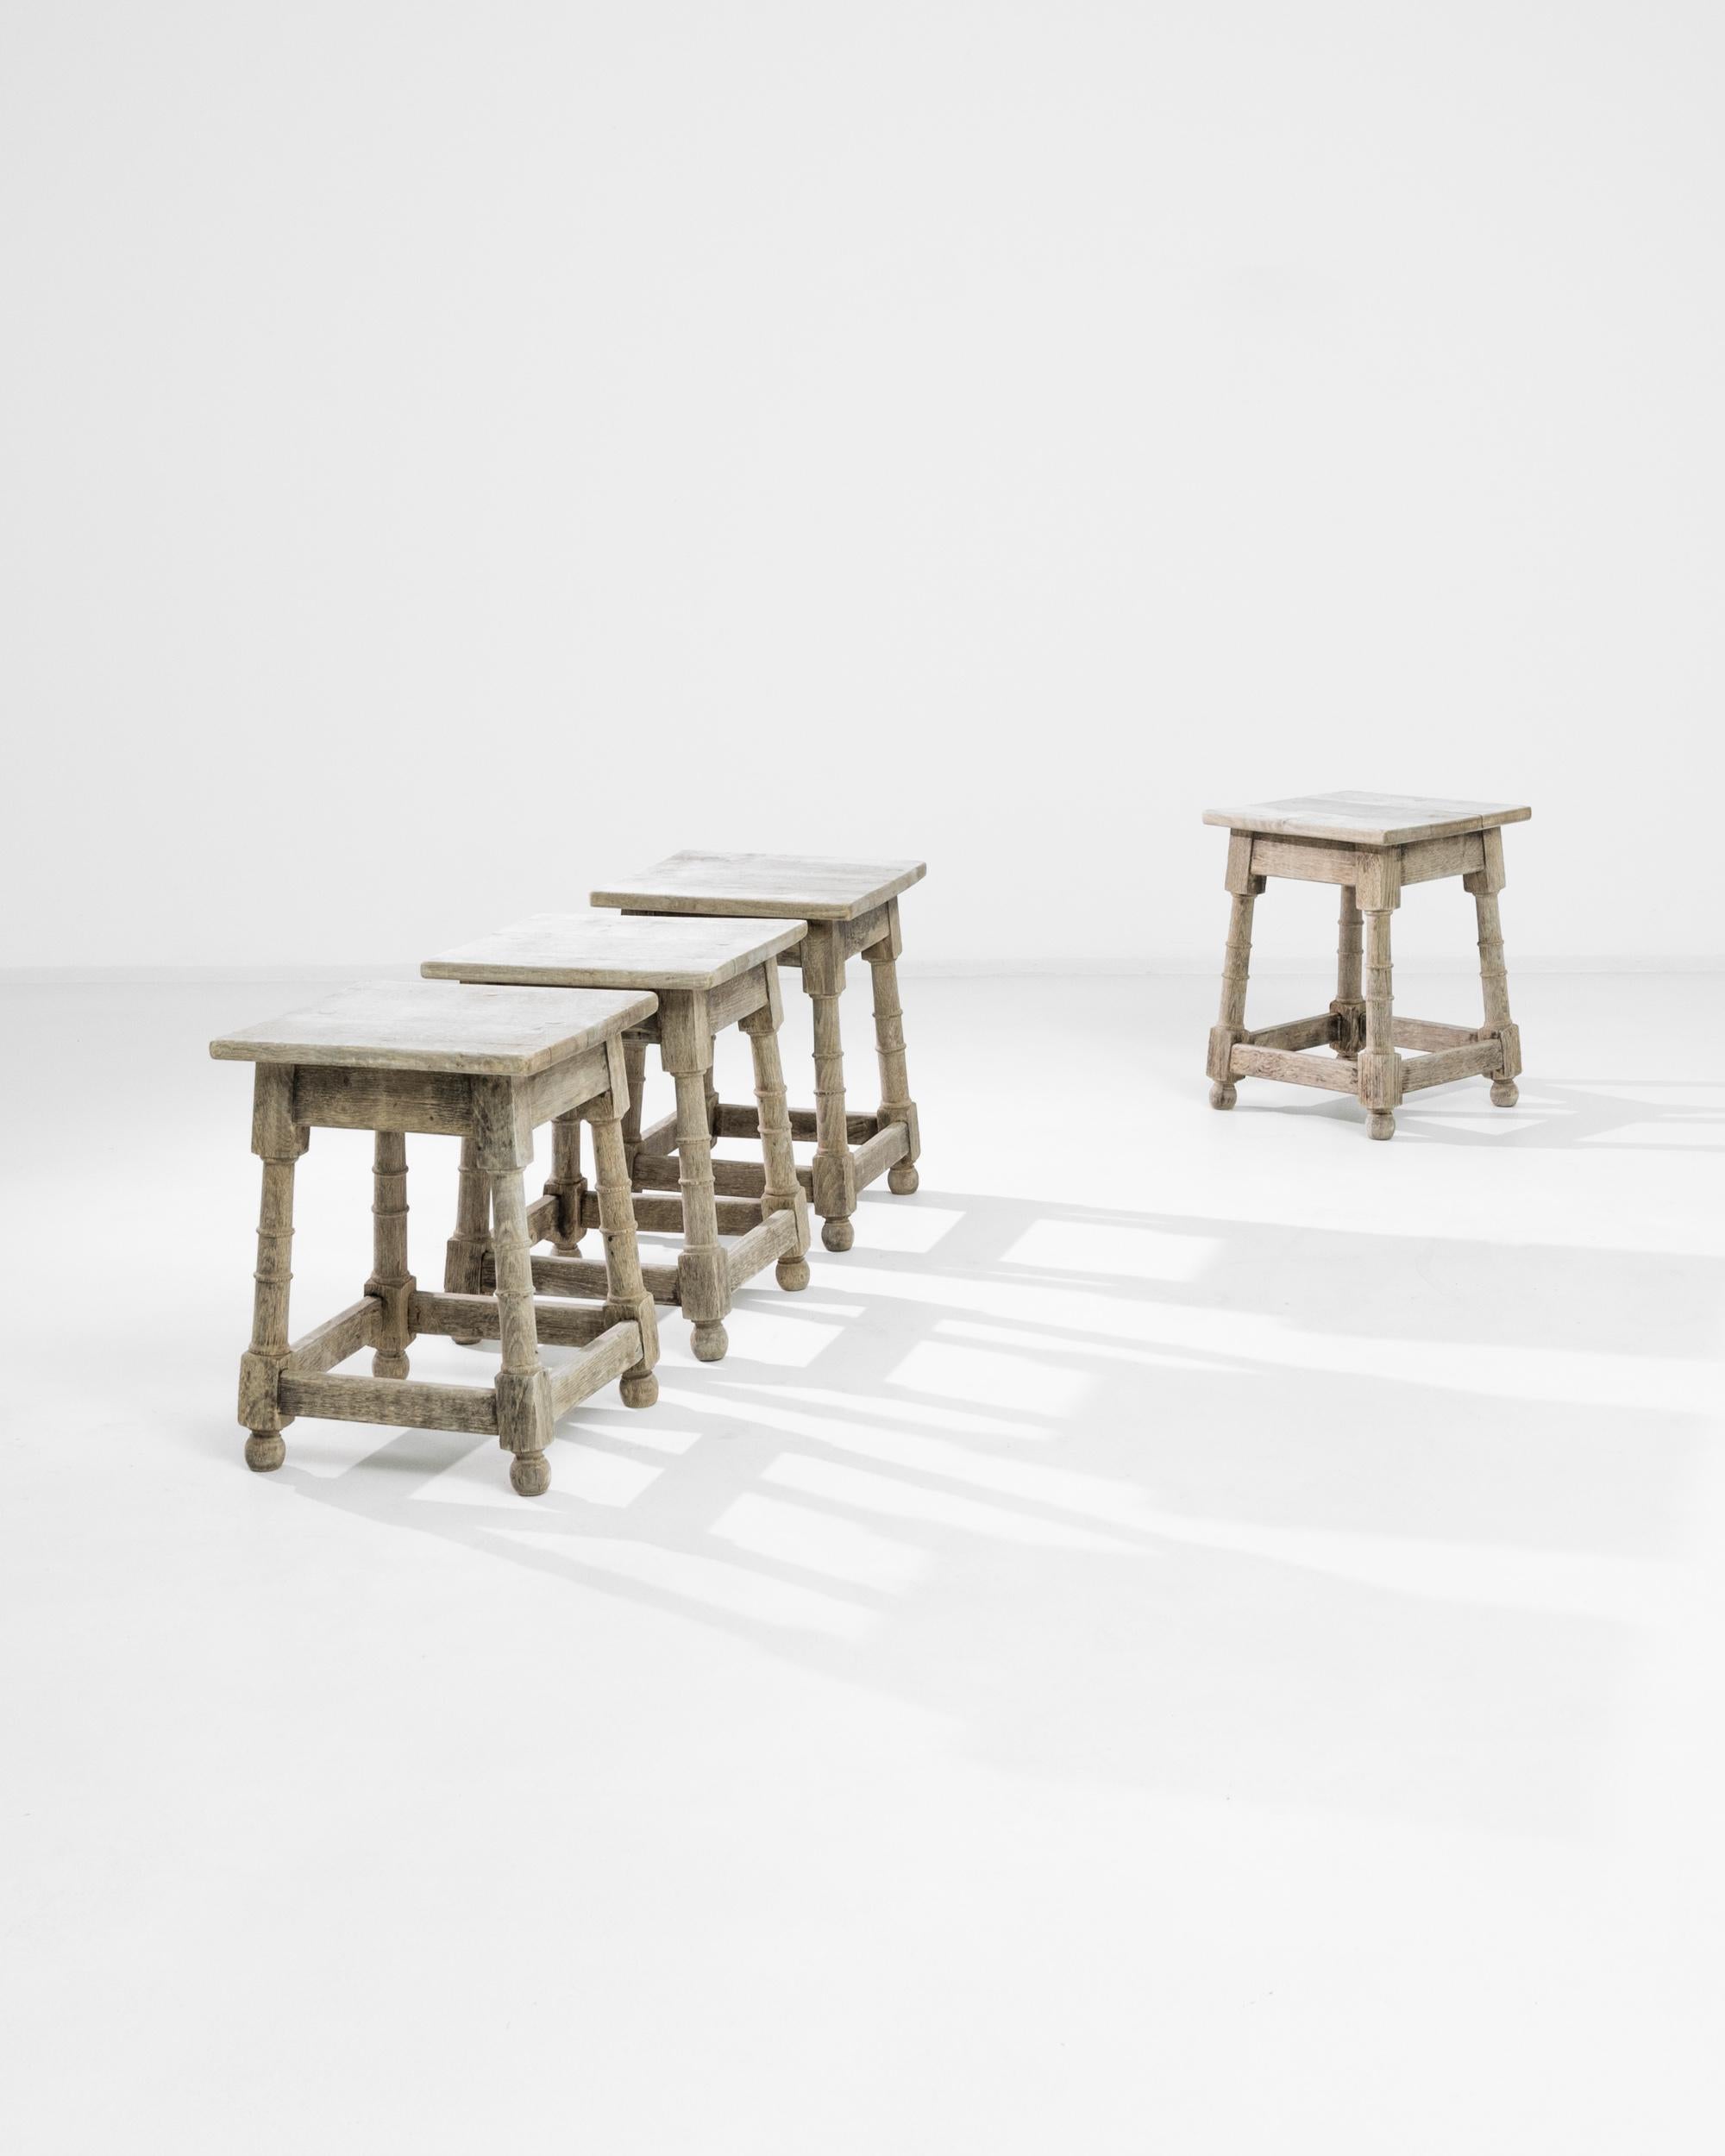 A set of four 20th century wooden stools produced in France. Four bleached oak stools featuring splayed legs and bun feet, joined by square stretchers and assembled with mortise and tenon joints. The carved legs exhibit four turned rings and